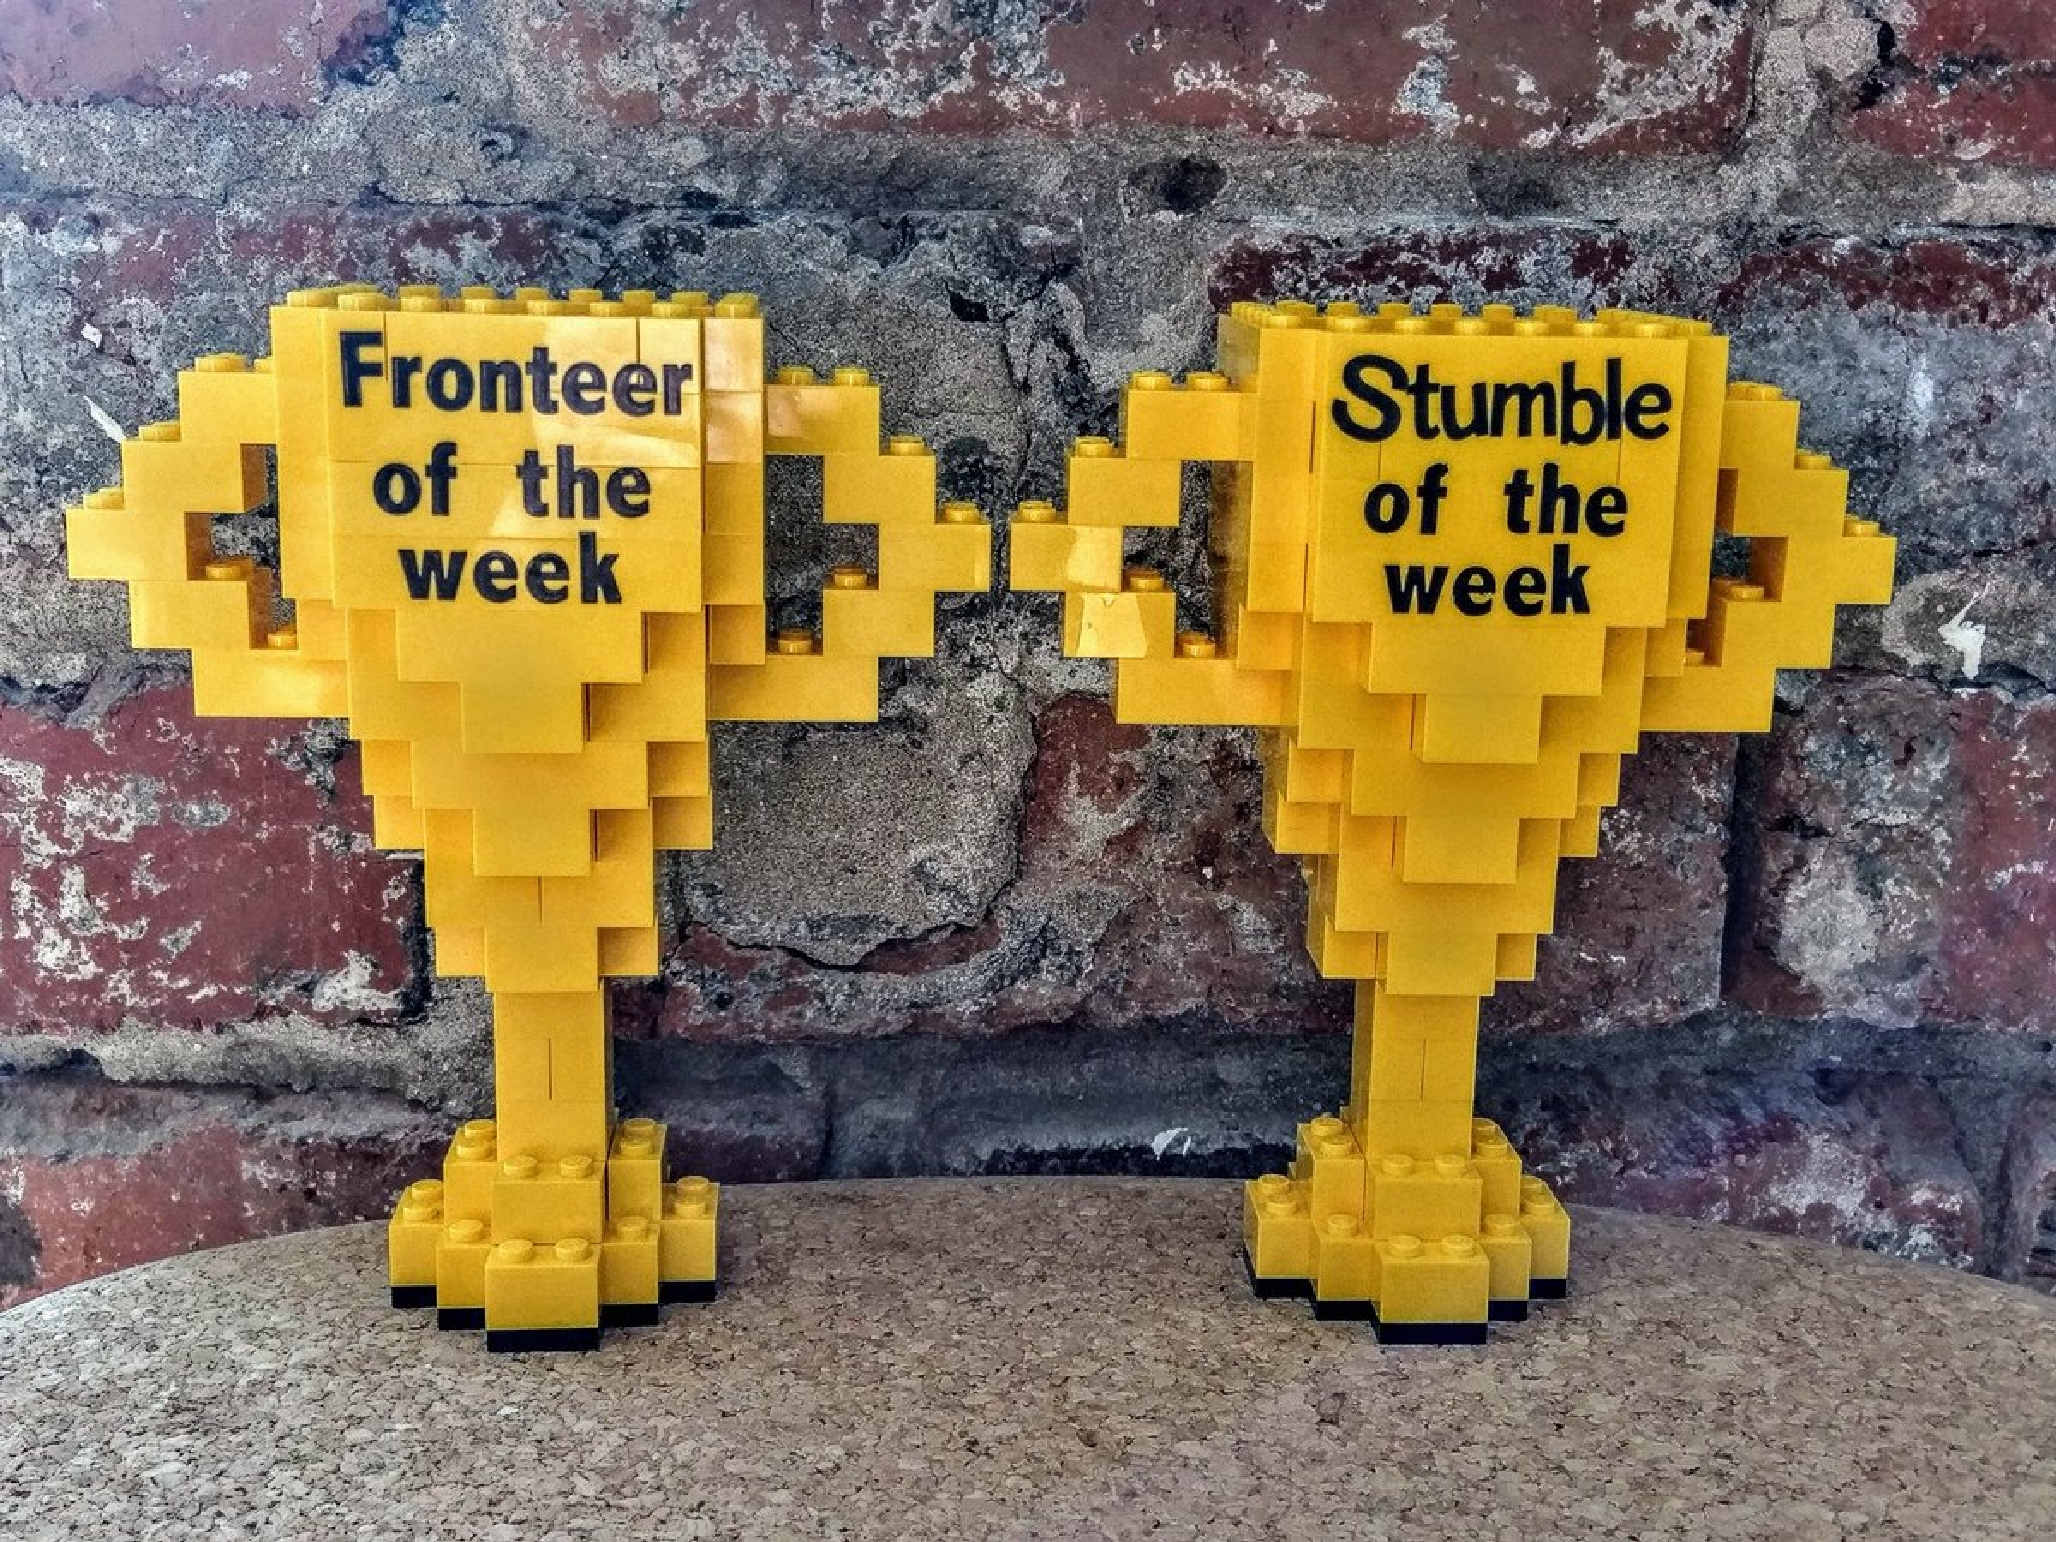 Fronteer of the Week and Stumble of the Week trophies crafted out of legos